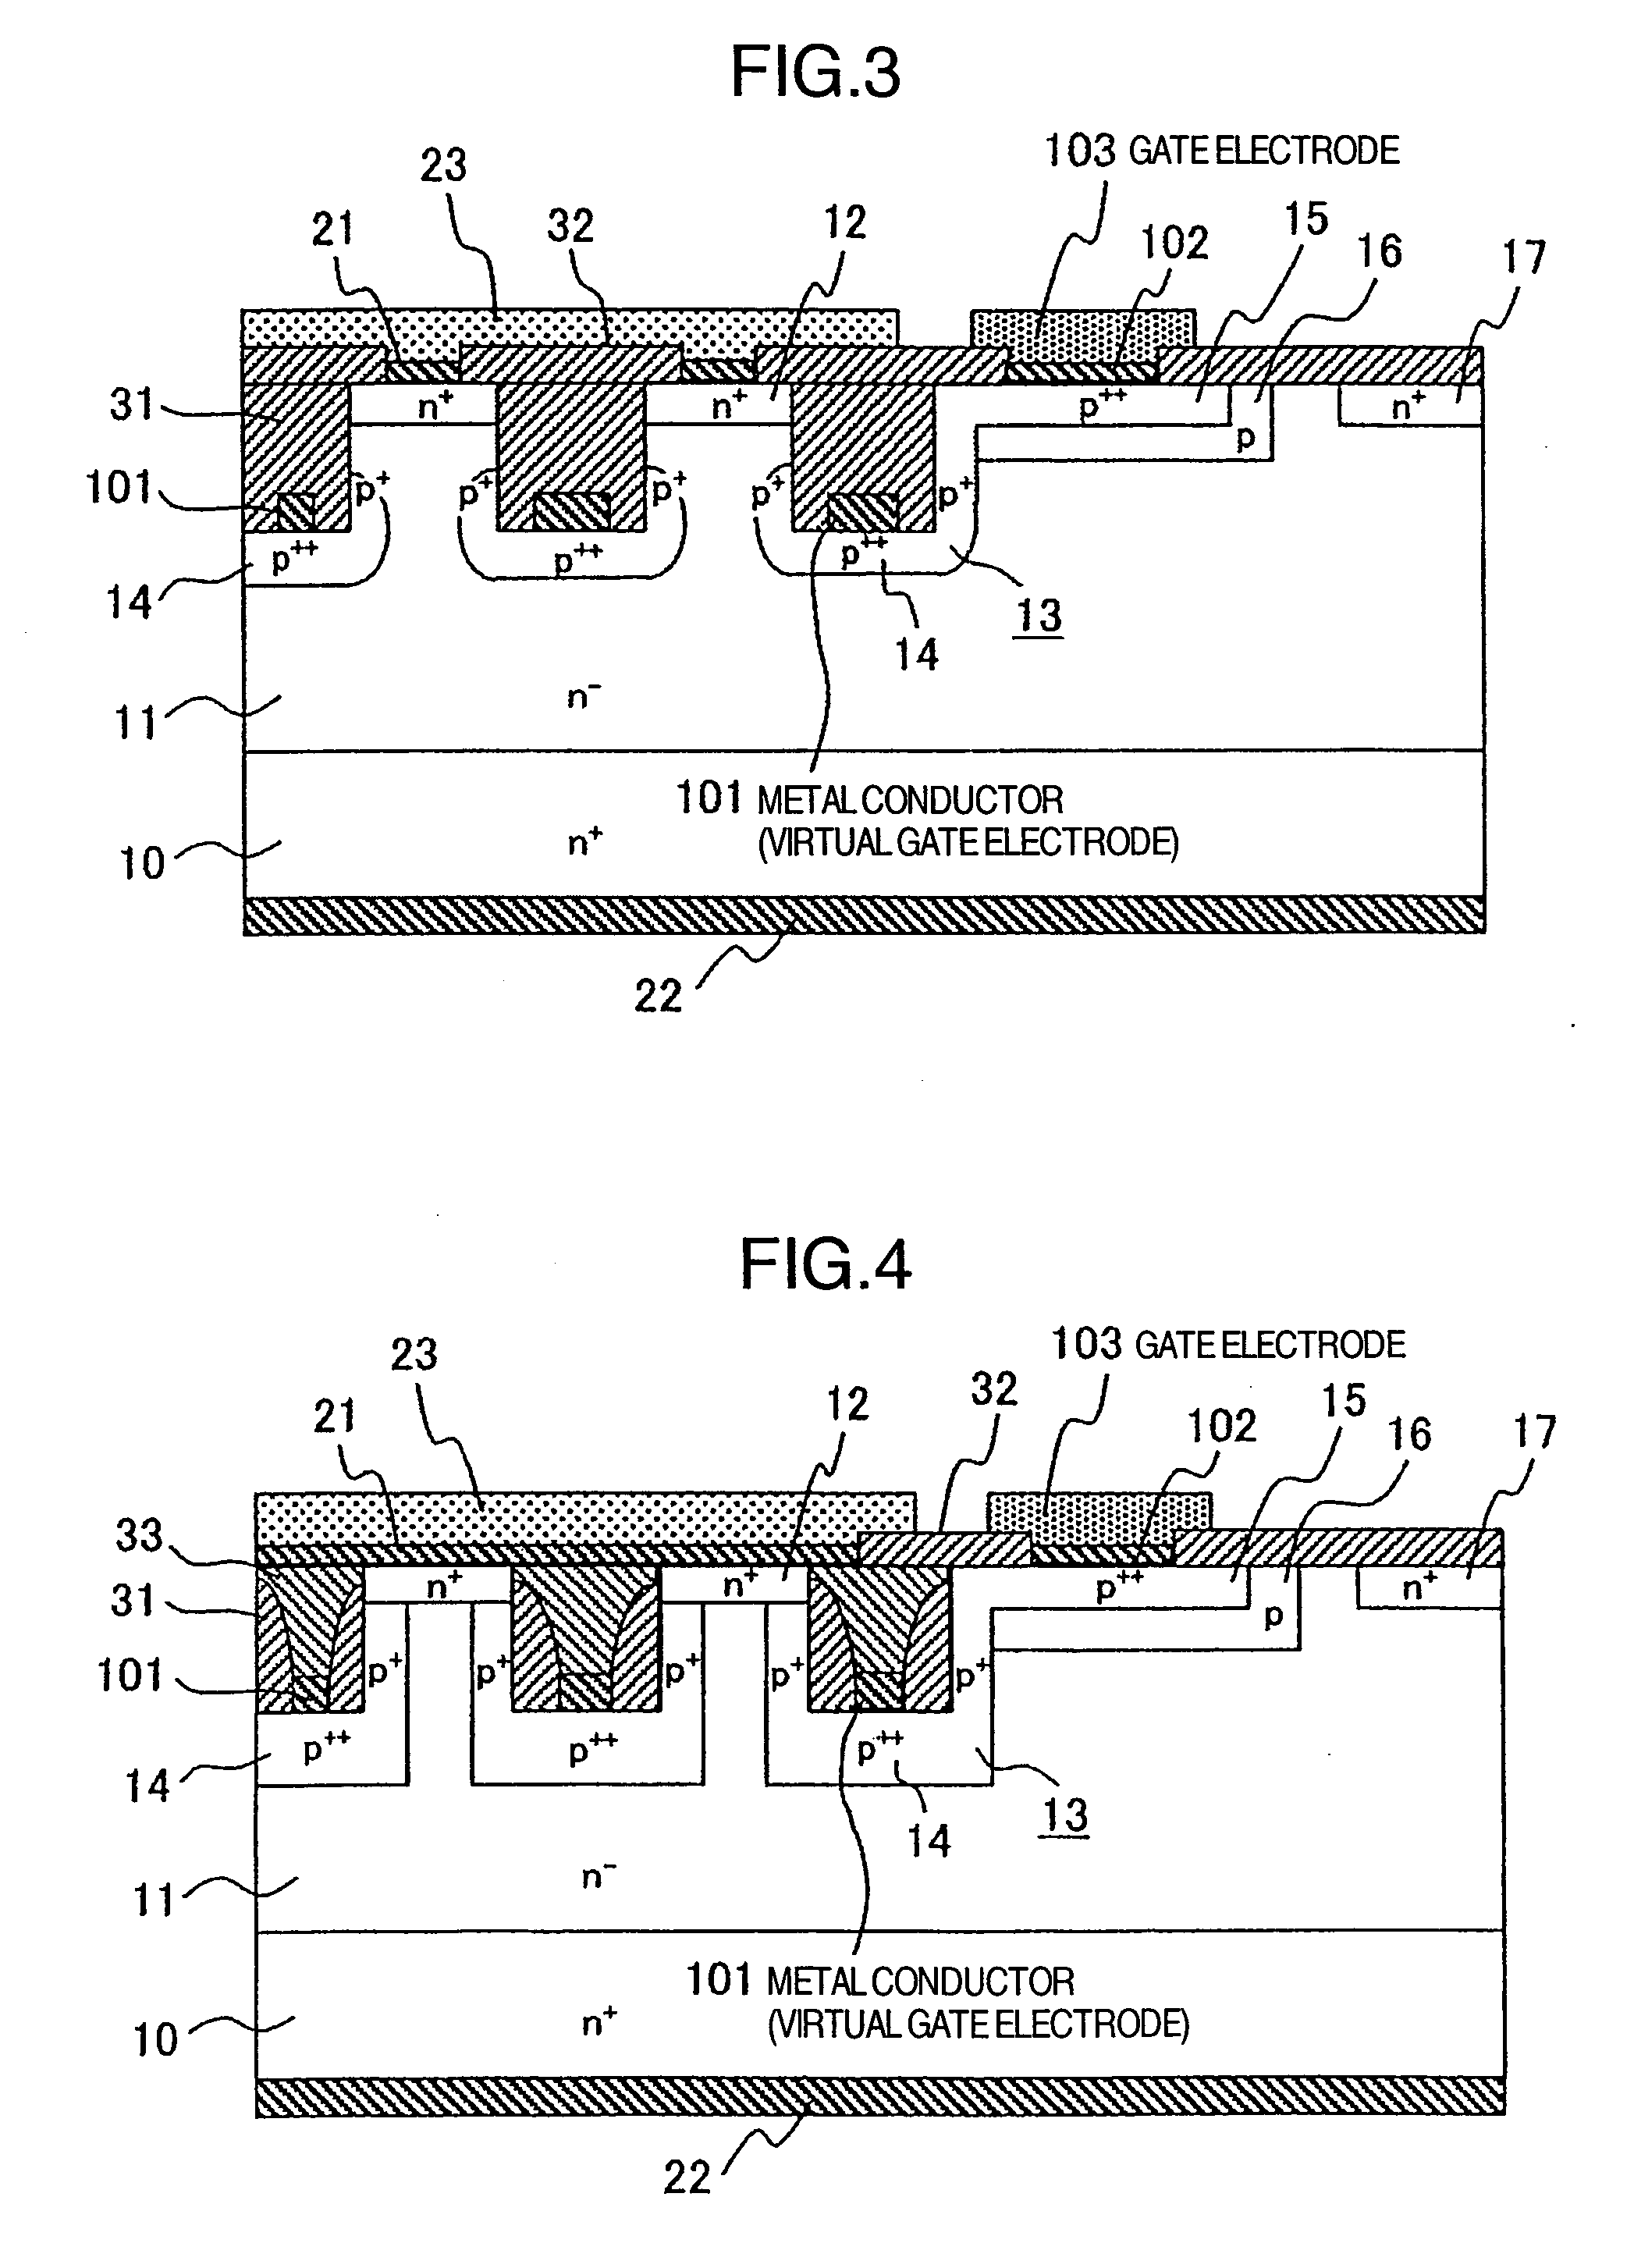 Semiconductor devices